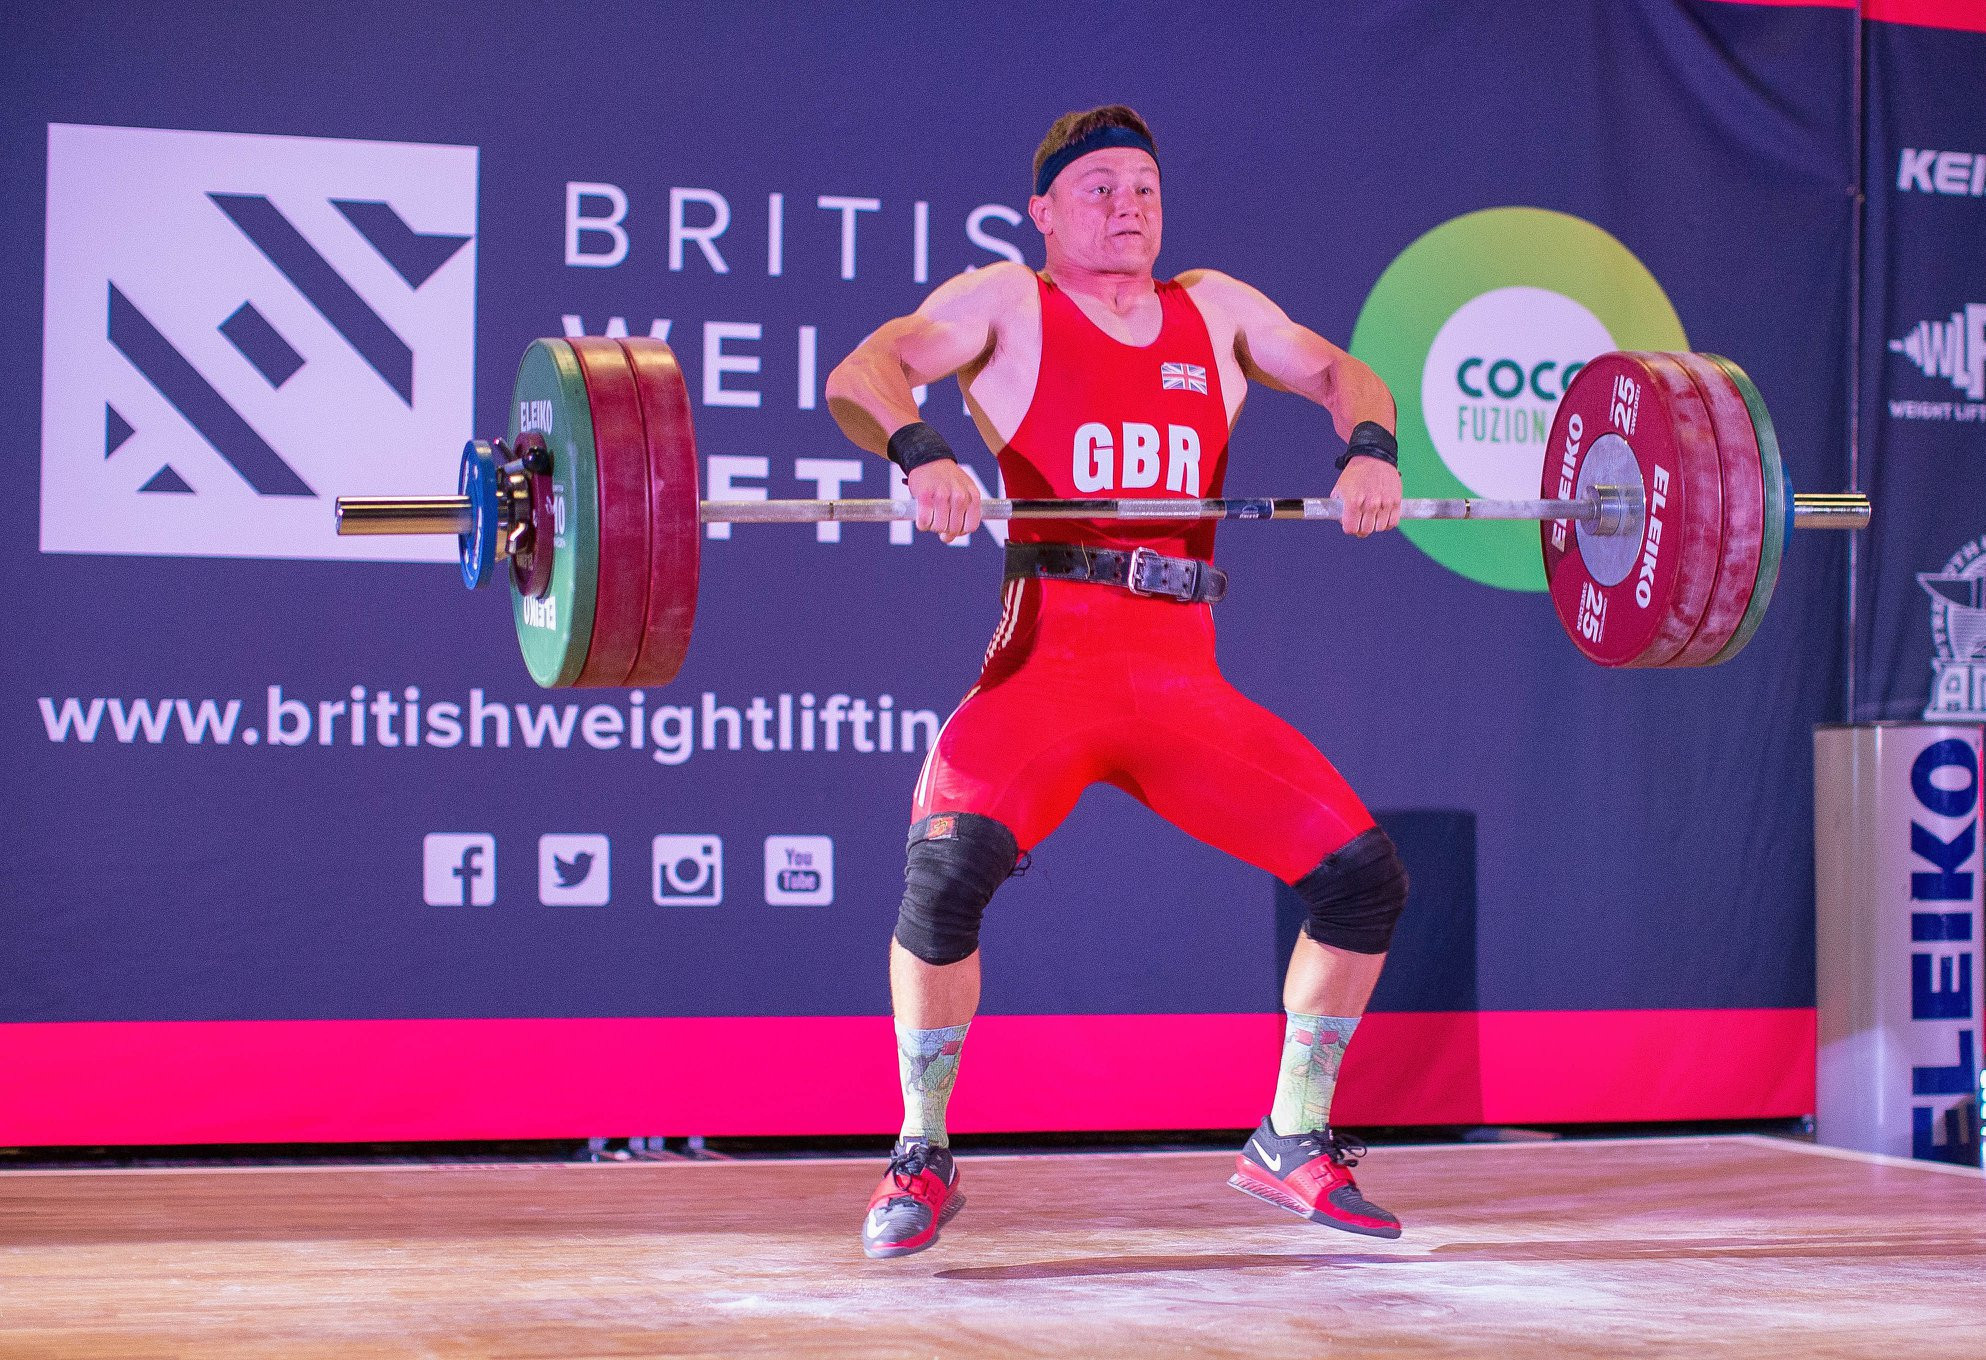 The British Weight Lifting Board has 10 members ©BWL